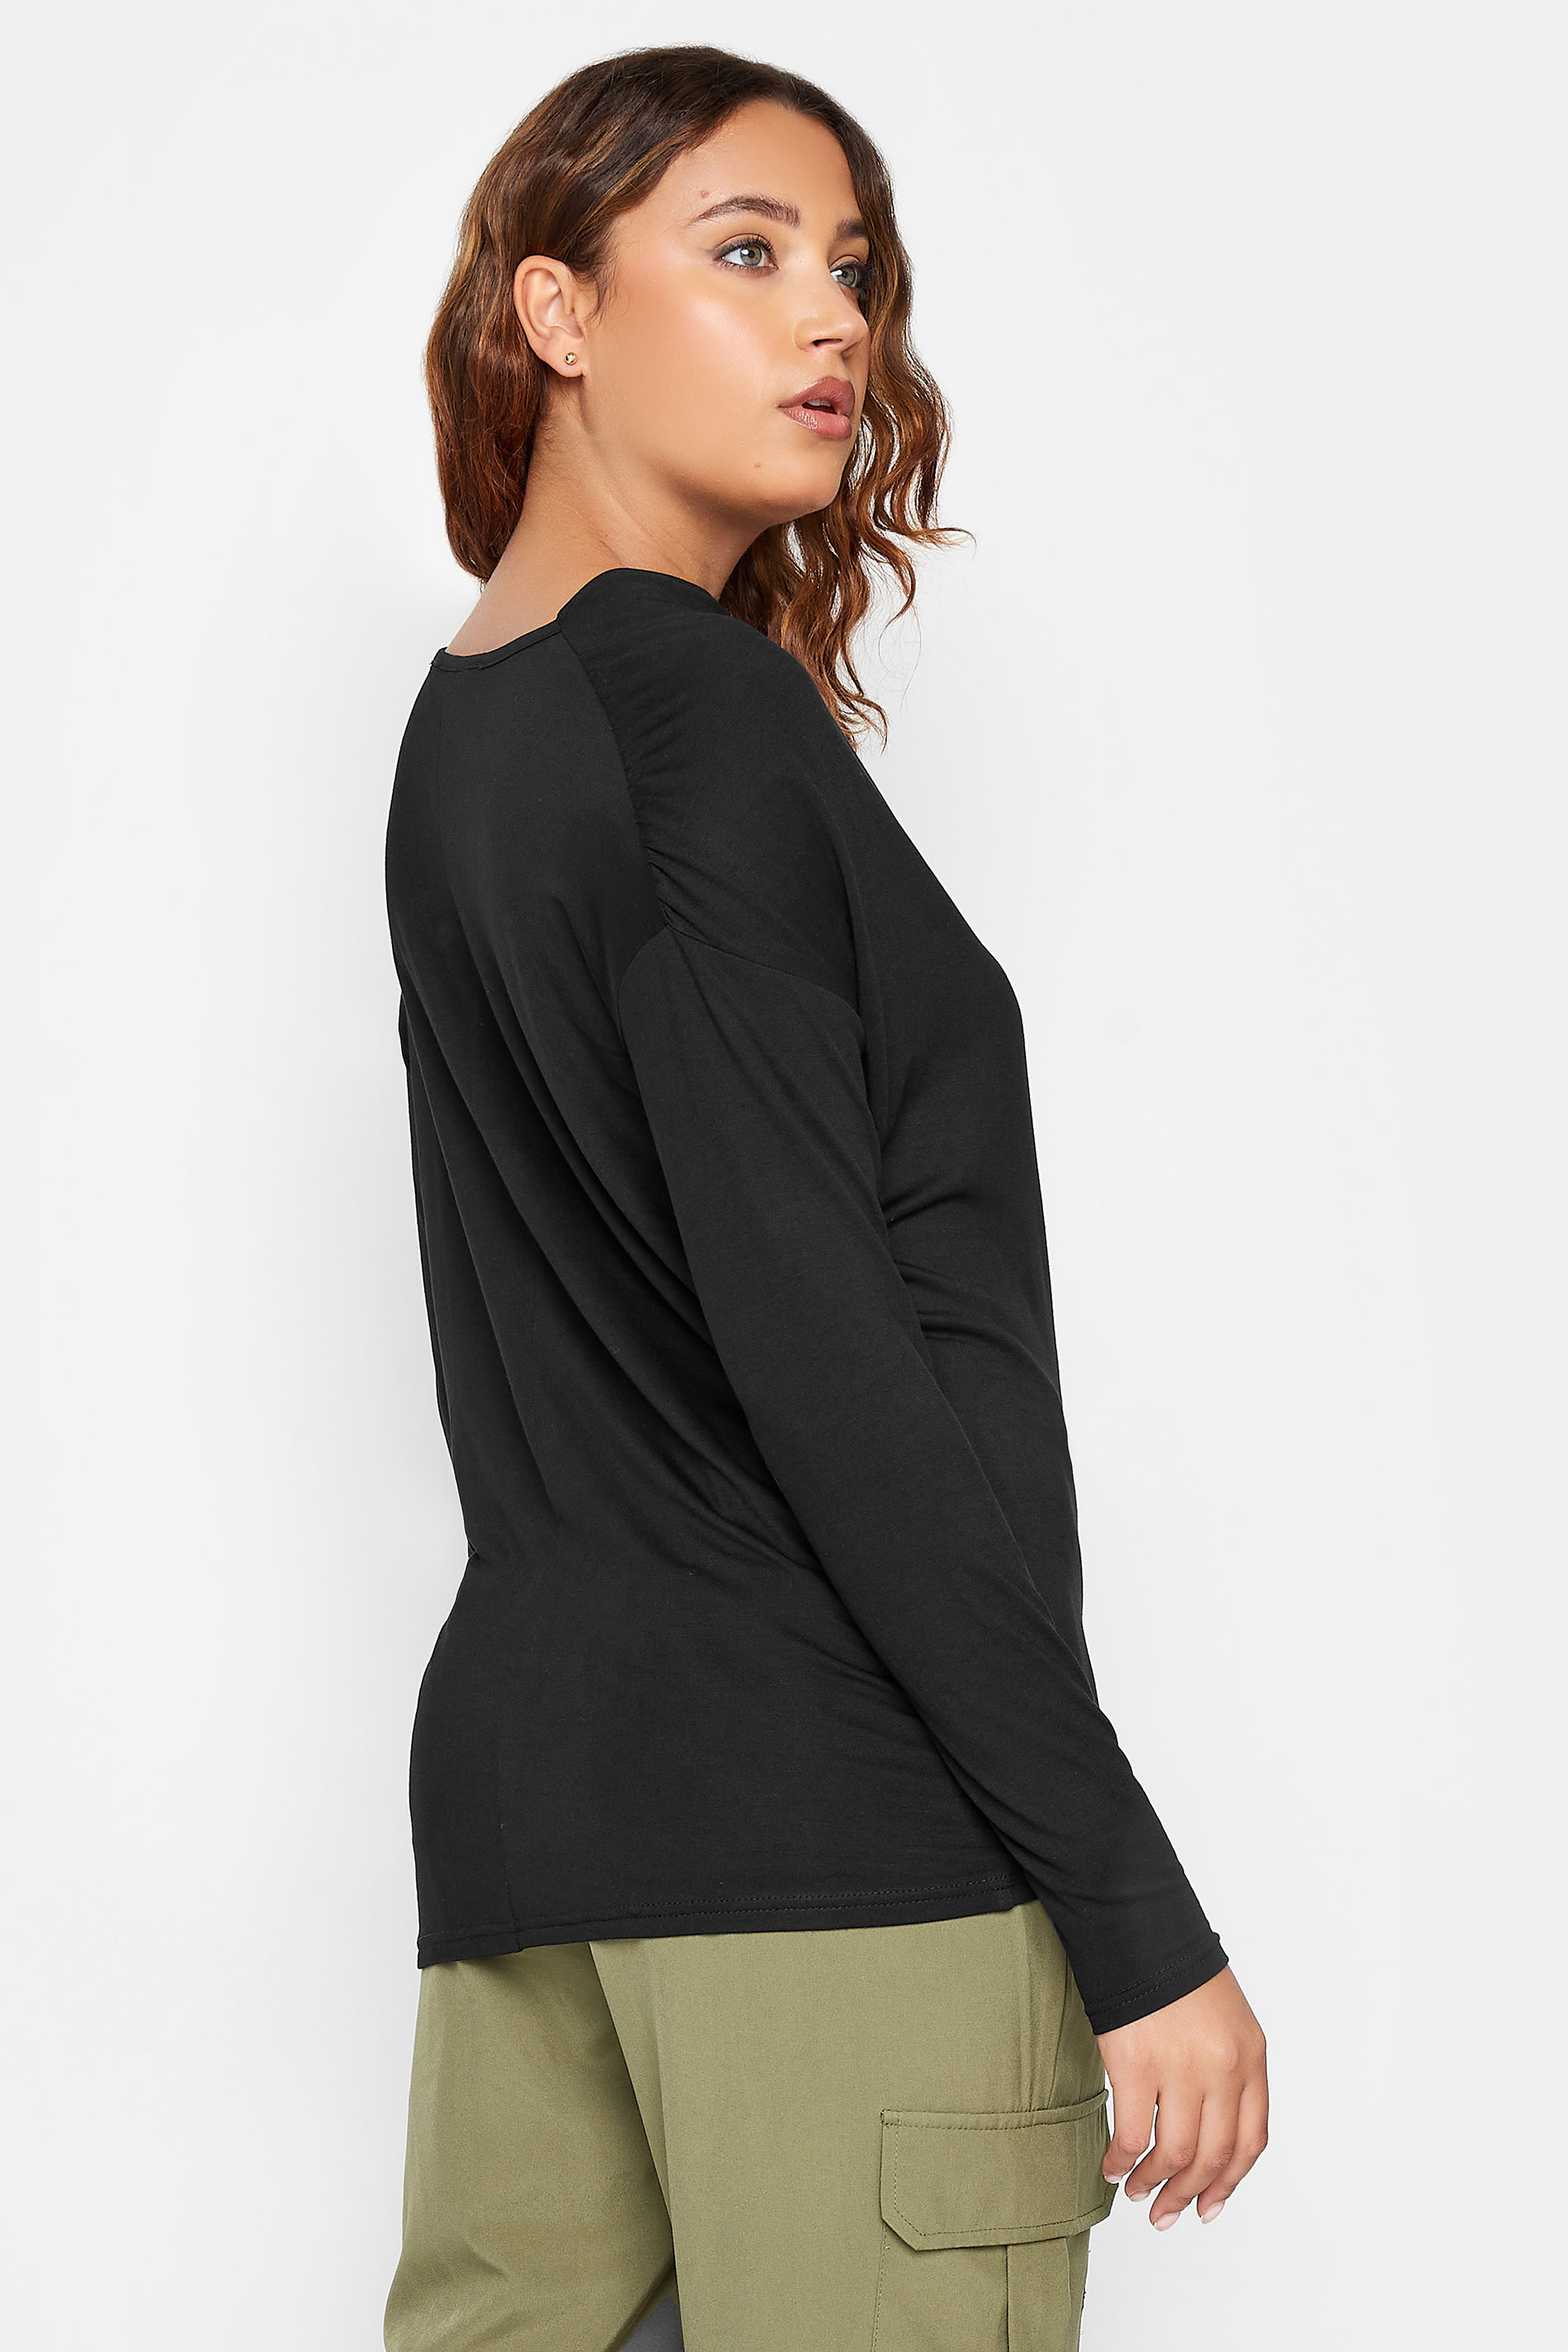 LTS Tall Women's Black Ruched Neck Top | Long Tall Sally 3